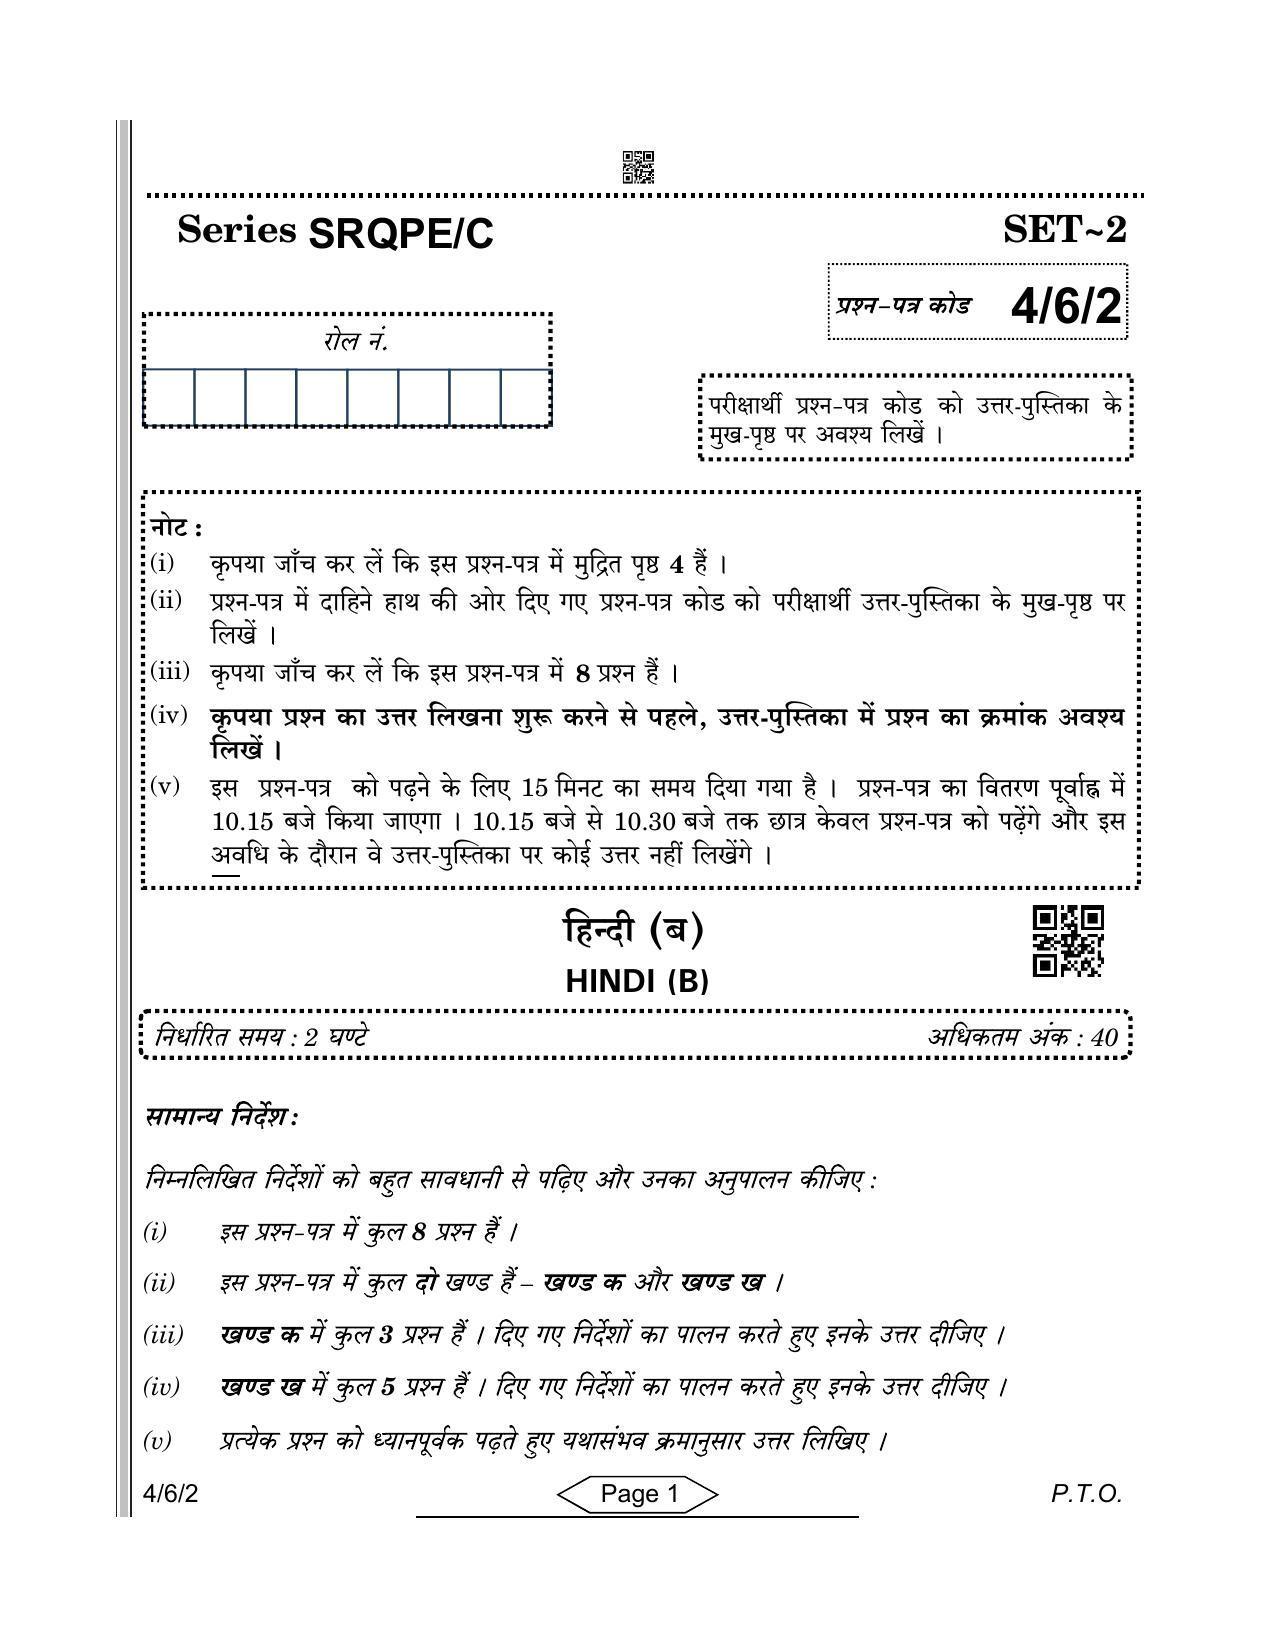 CBSE Class 10 4-6-2 Hindi-B 2022 Compartment Question Paper - Page 1